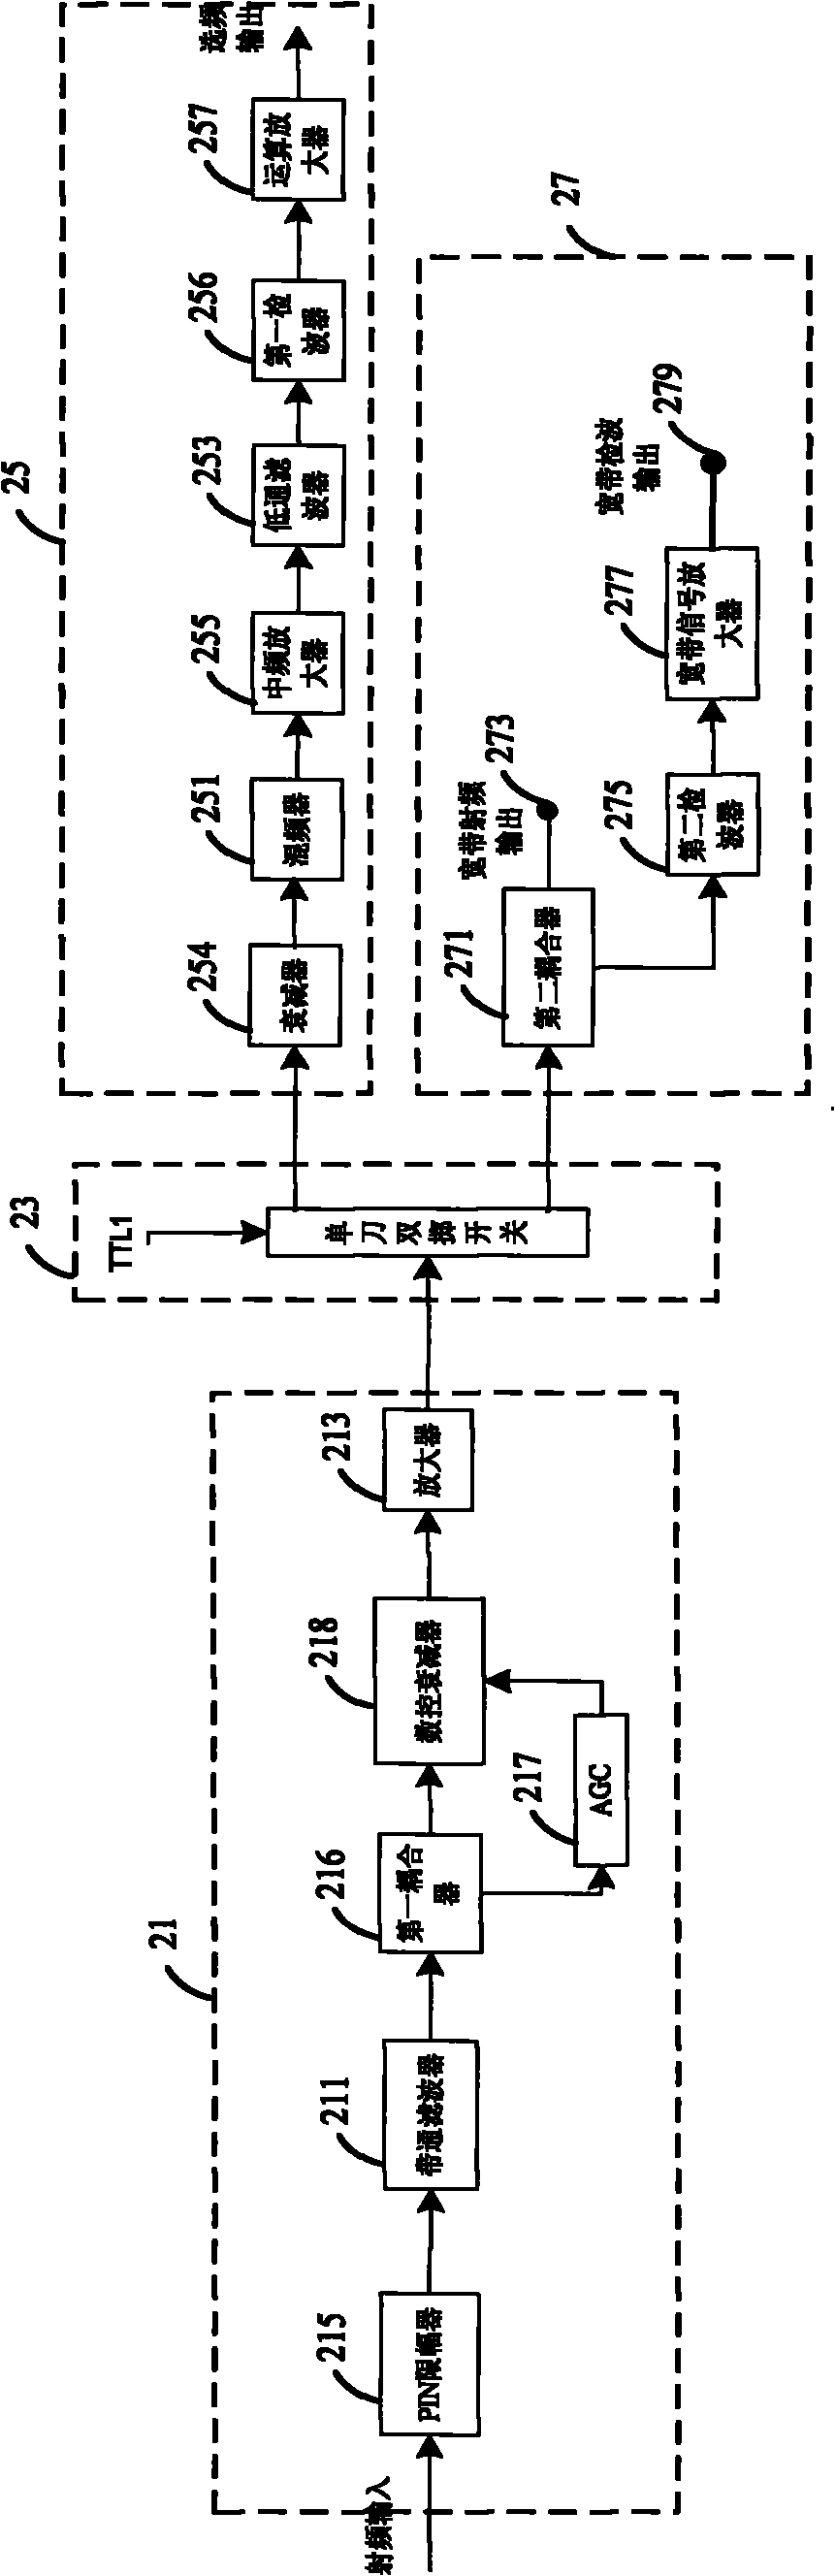 Signal receiving conditioner of UHF partial discharge detecting system